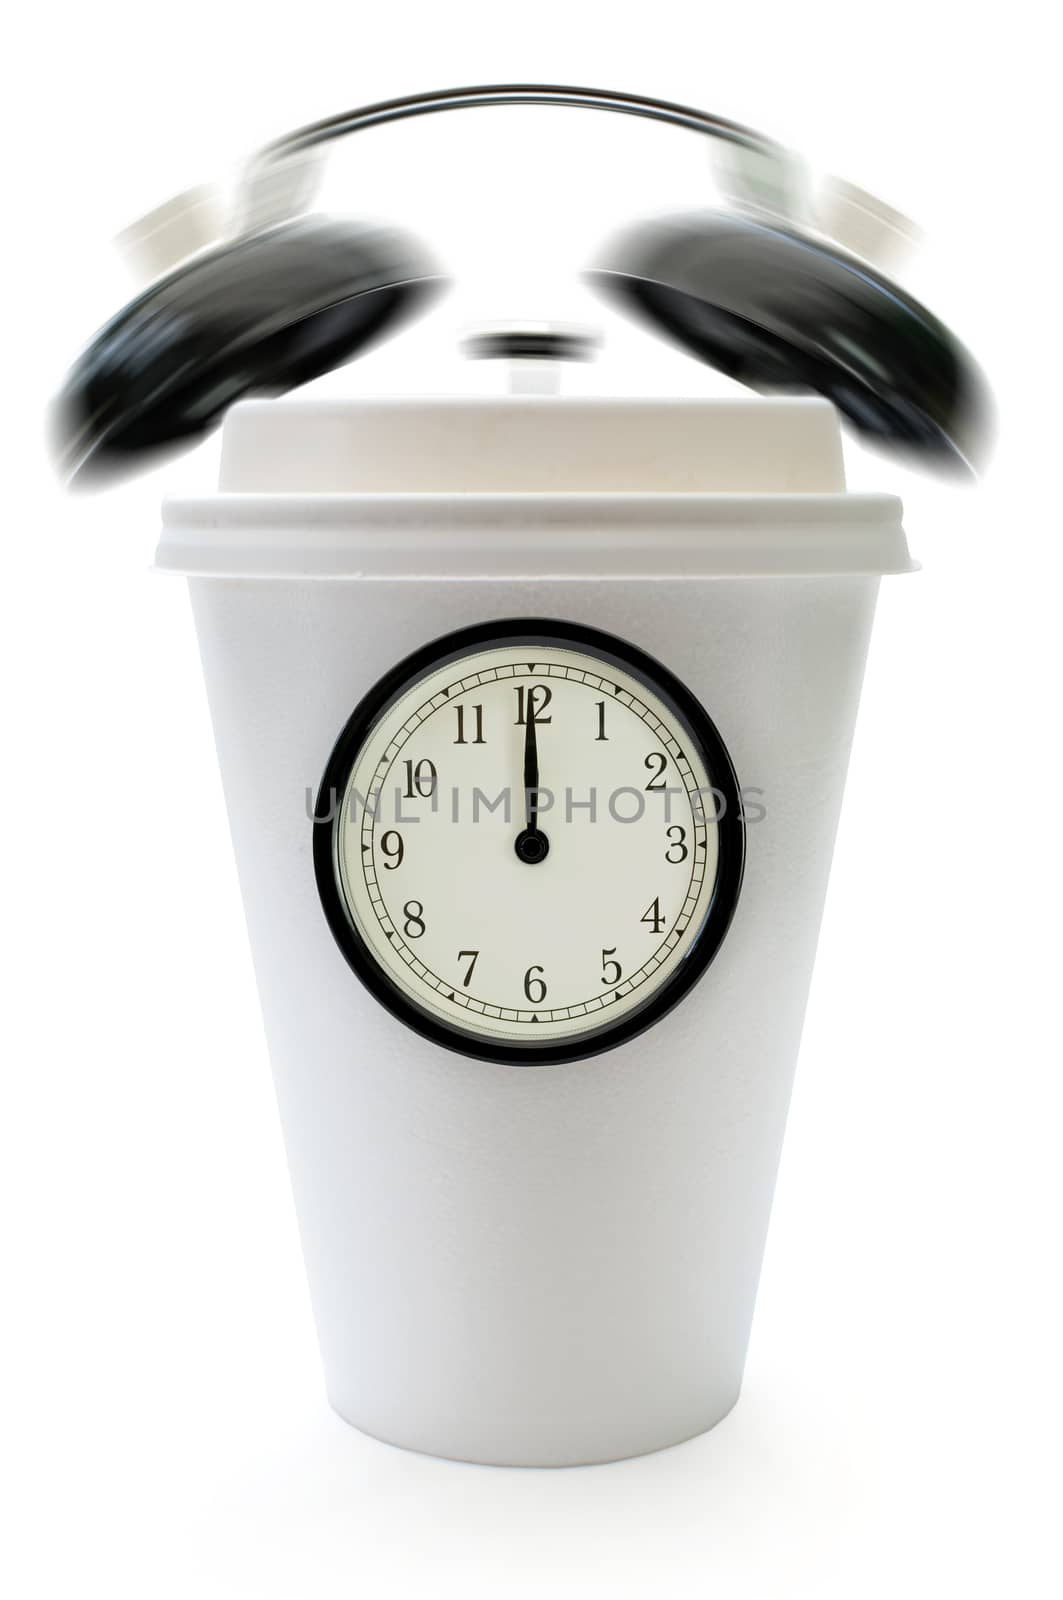 Taking a break concept with clock face and ringing bells around a plastic coffee cup 